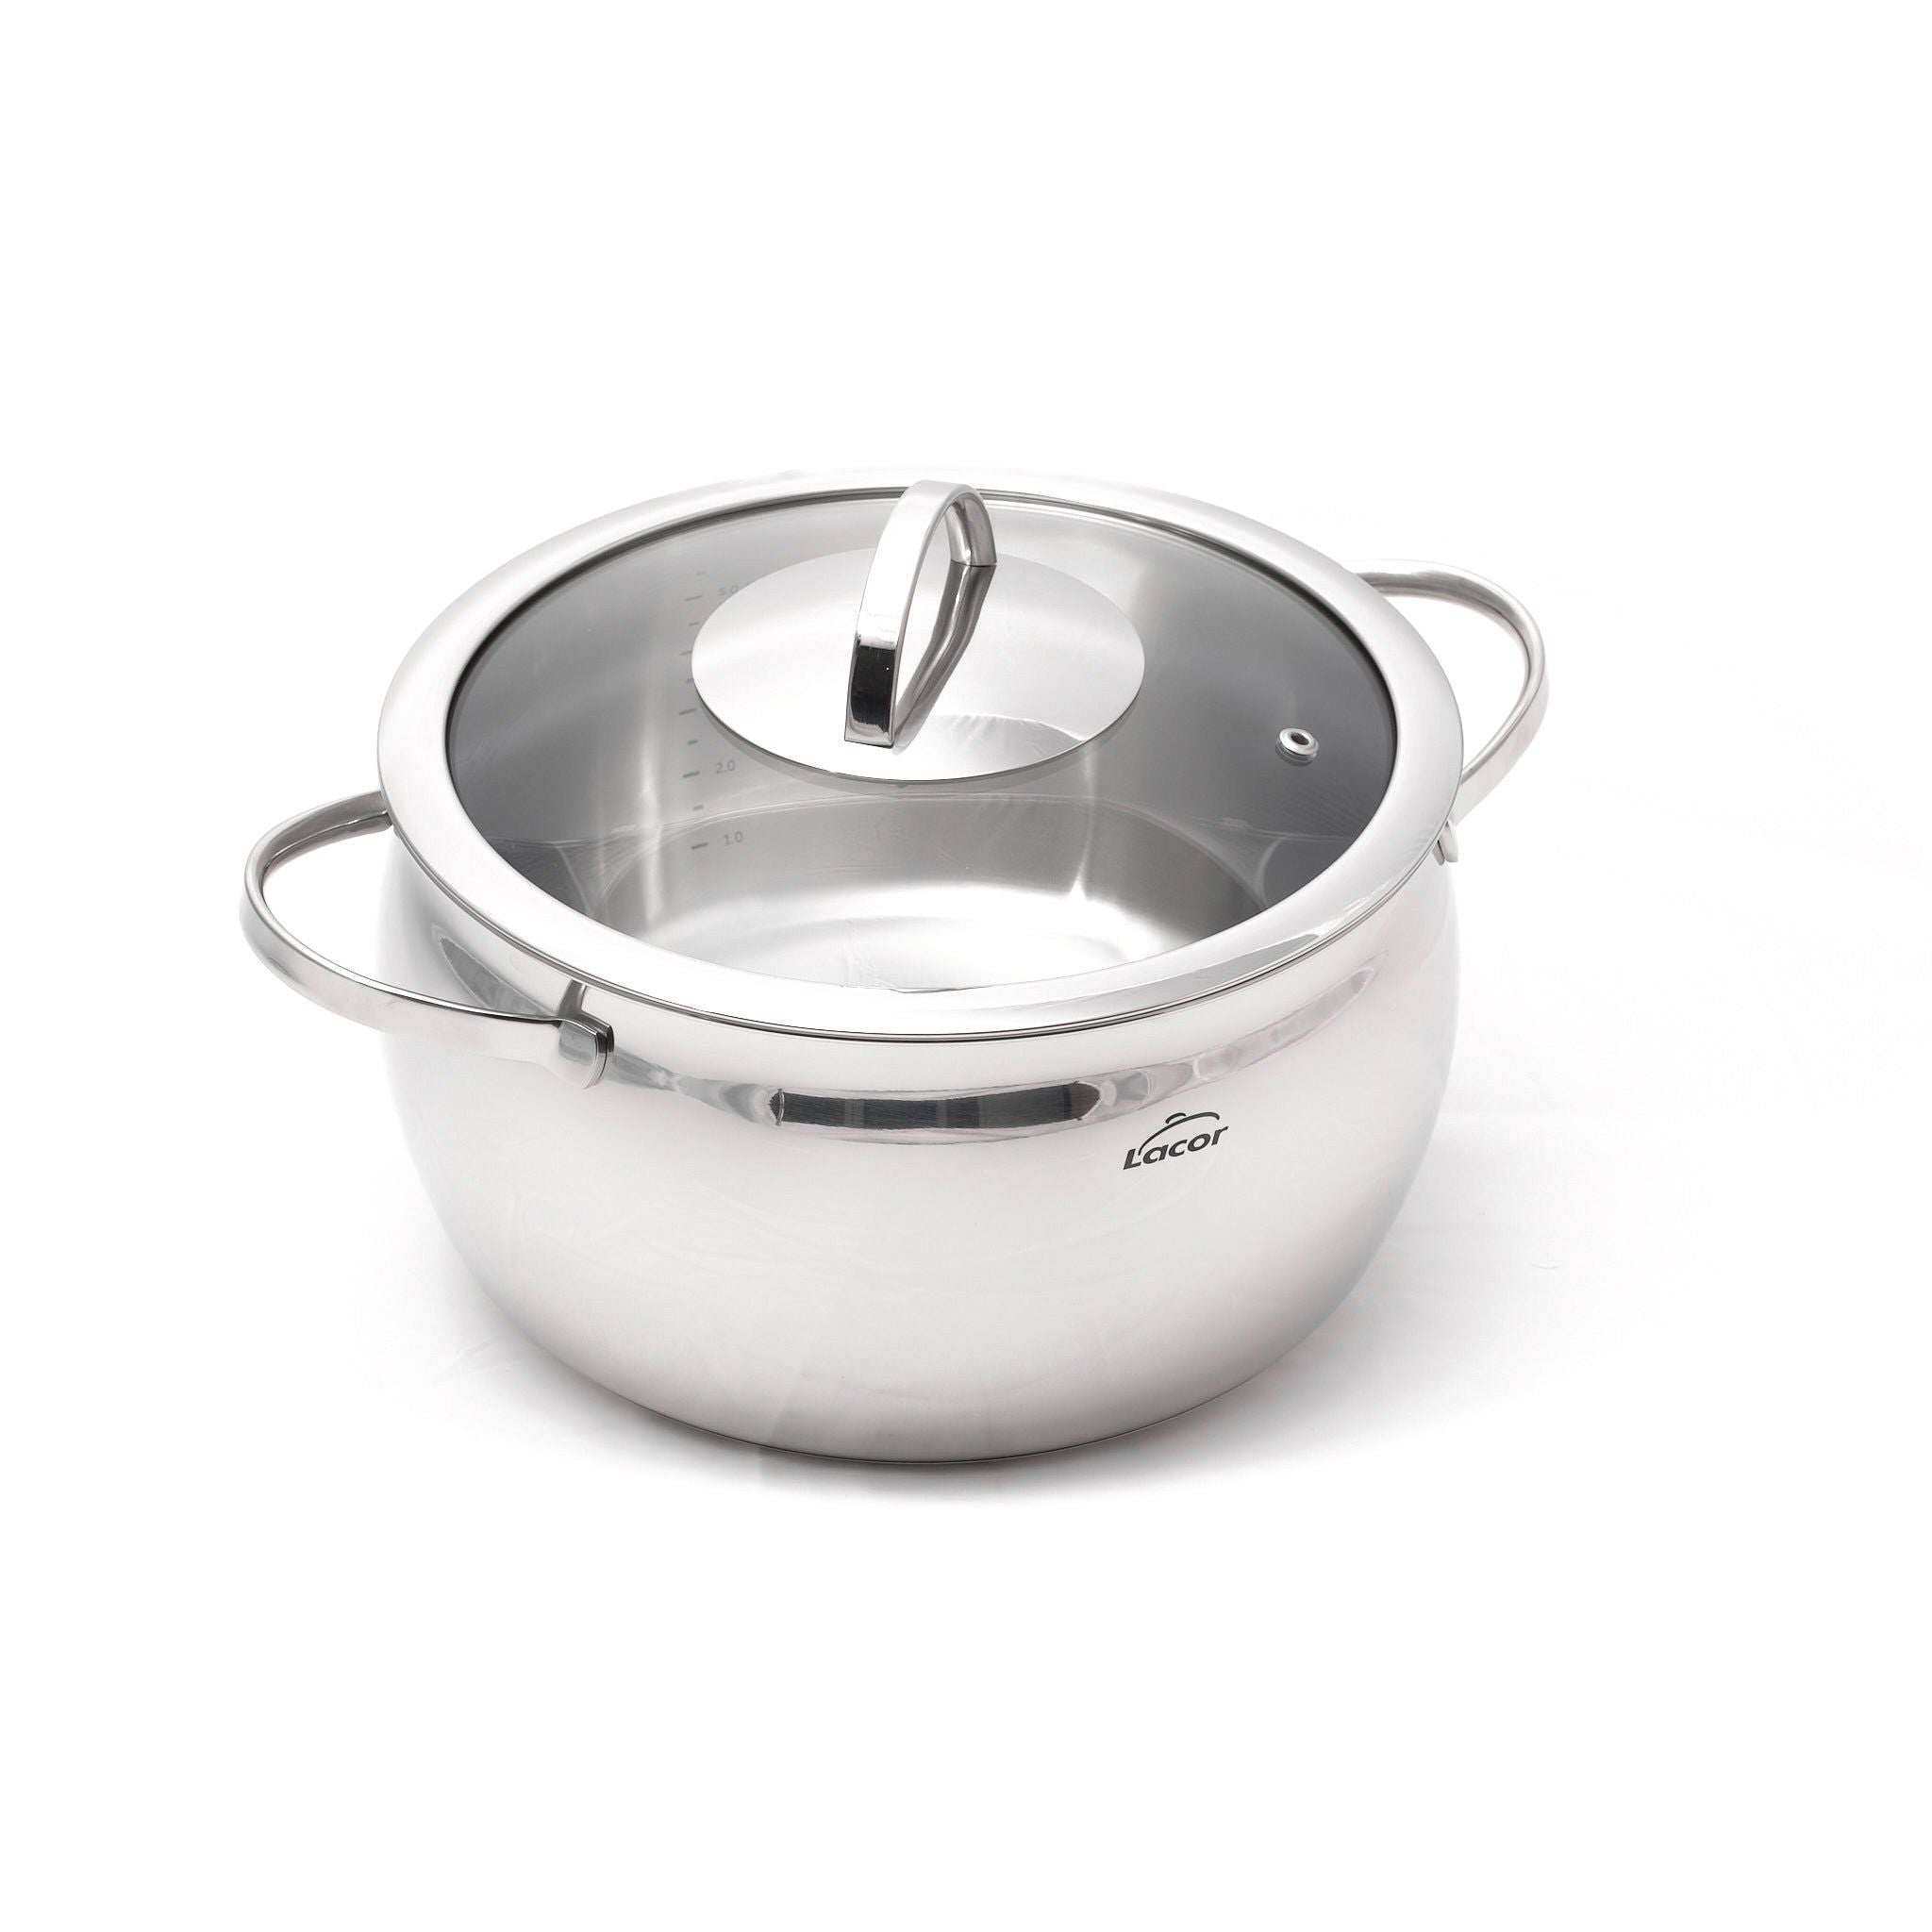 Belly Stock Pot with Lid - 5.8 qt Lacor Home